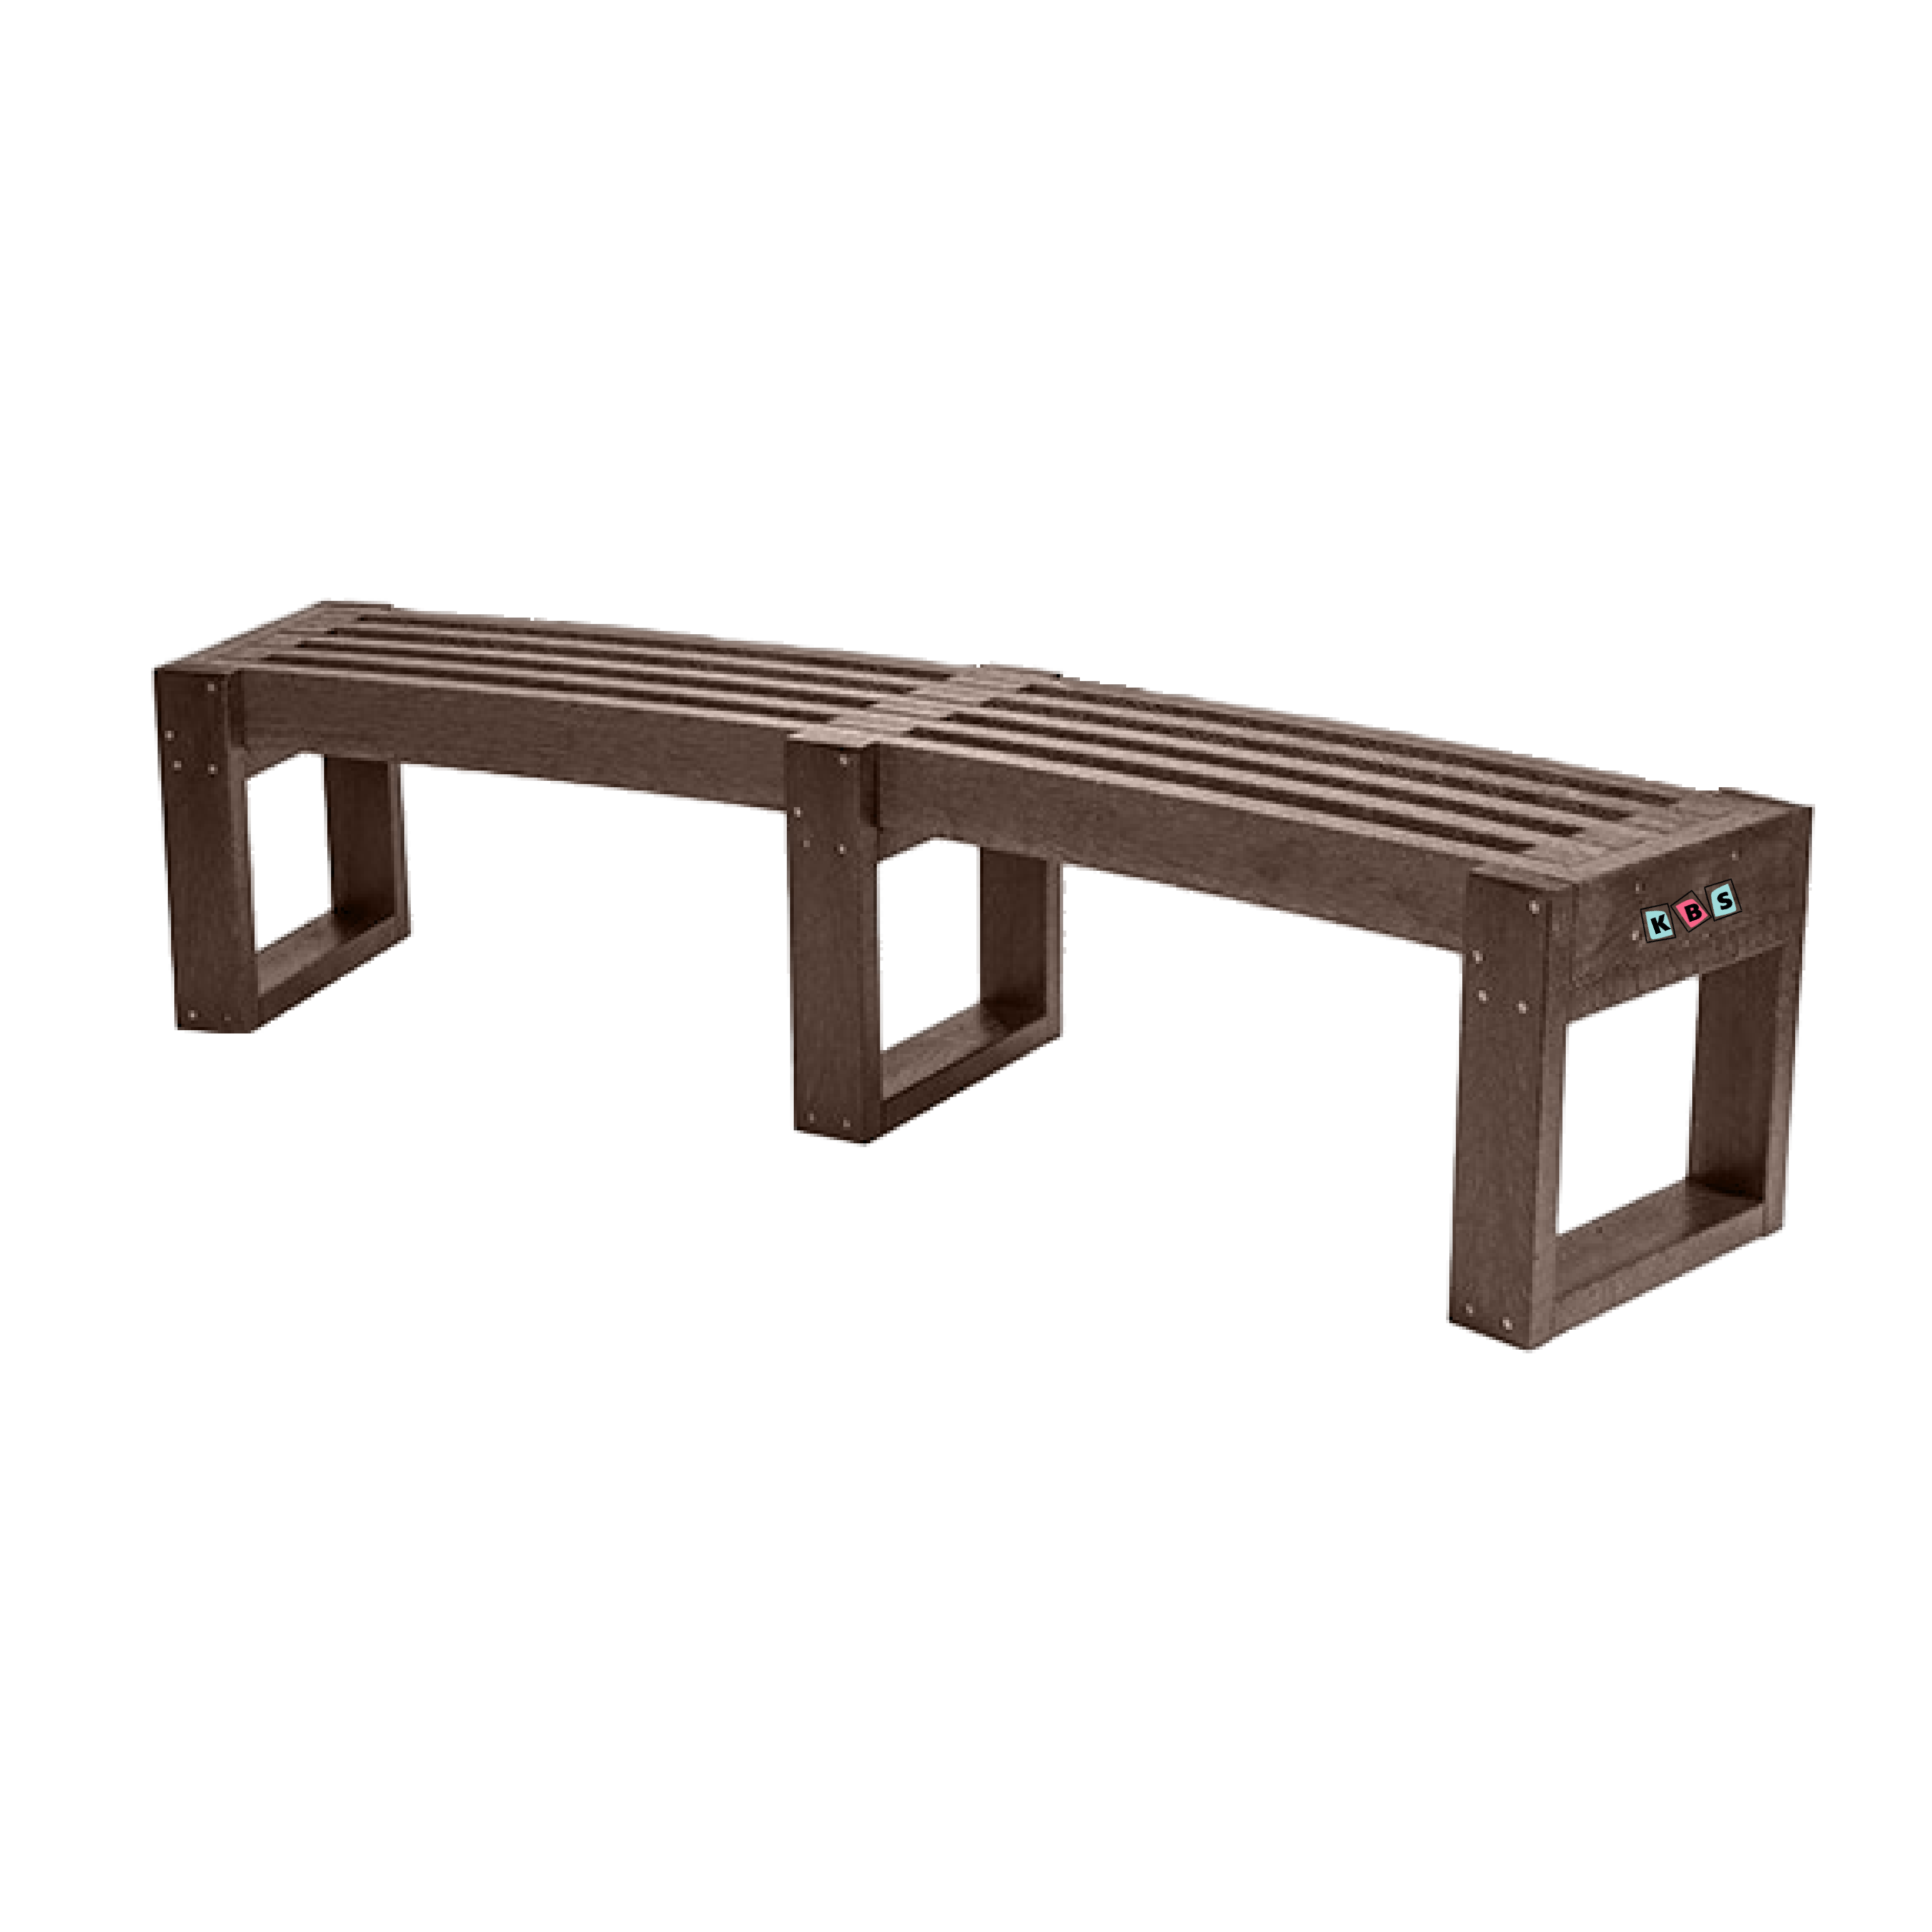 Edge Bench 1.8 Curved Brown Brown-01